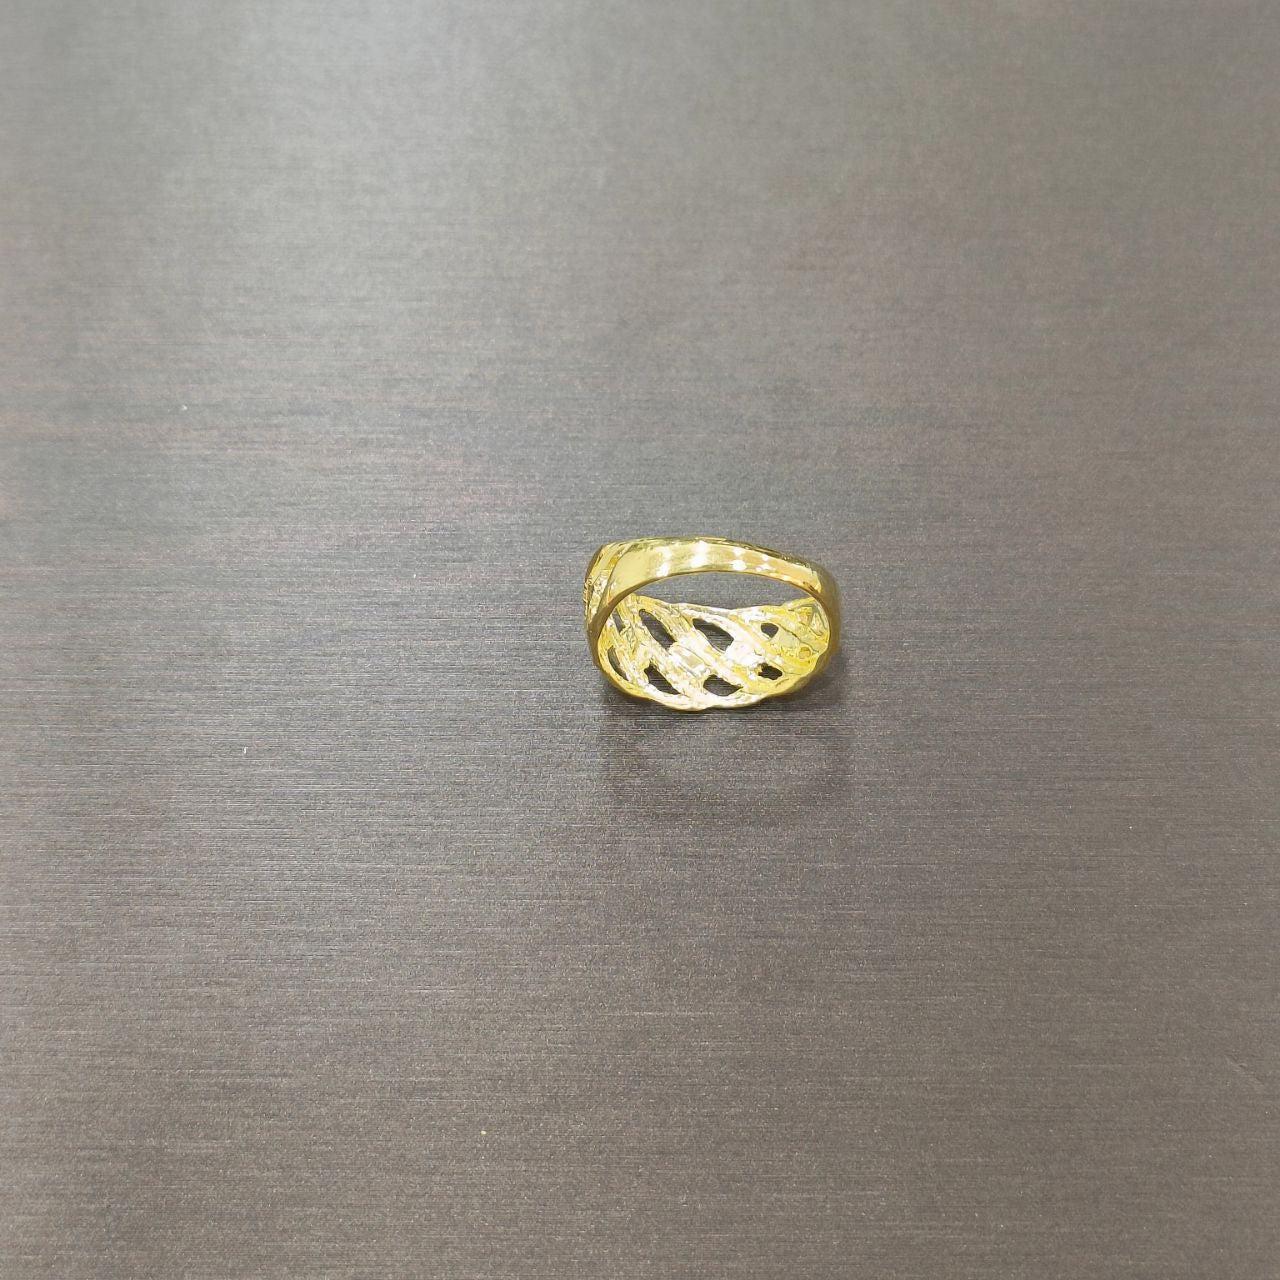 22K / 916 Gold Milo Coco Ring-916 gold-Best Gold Shop